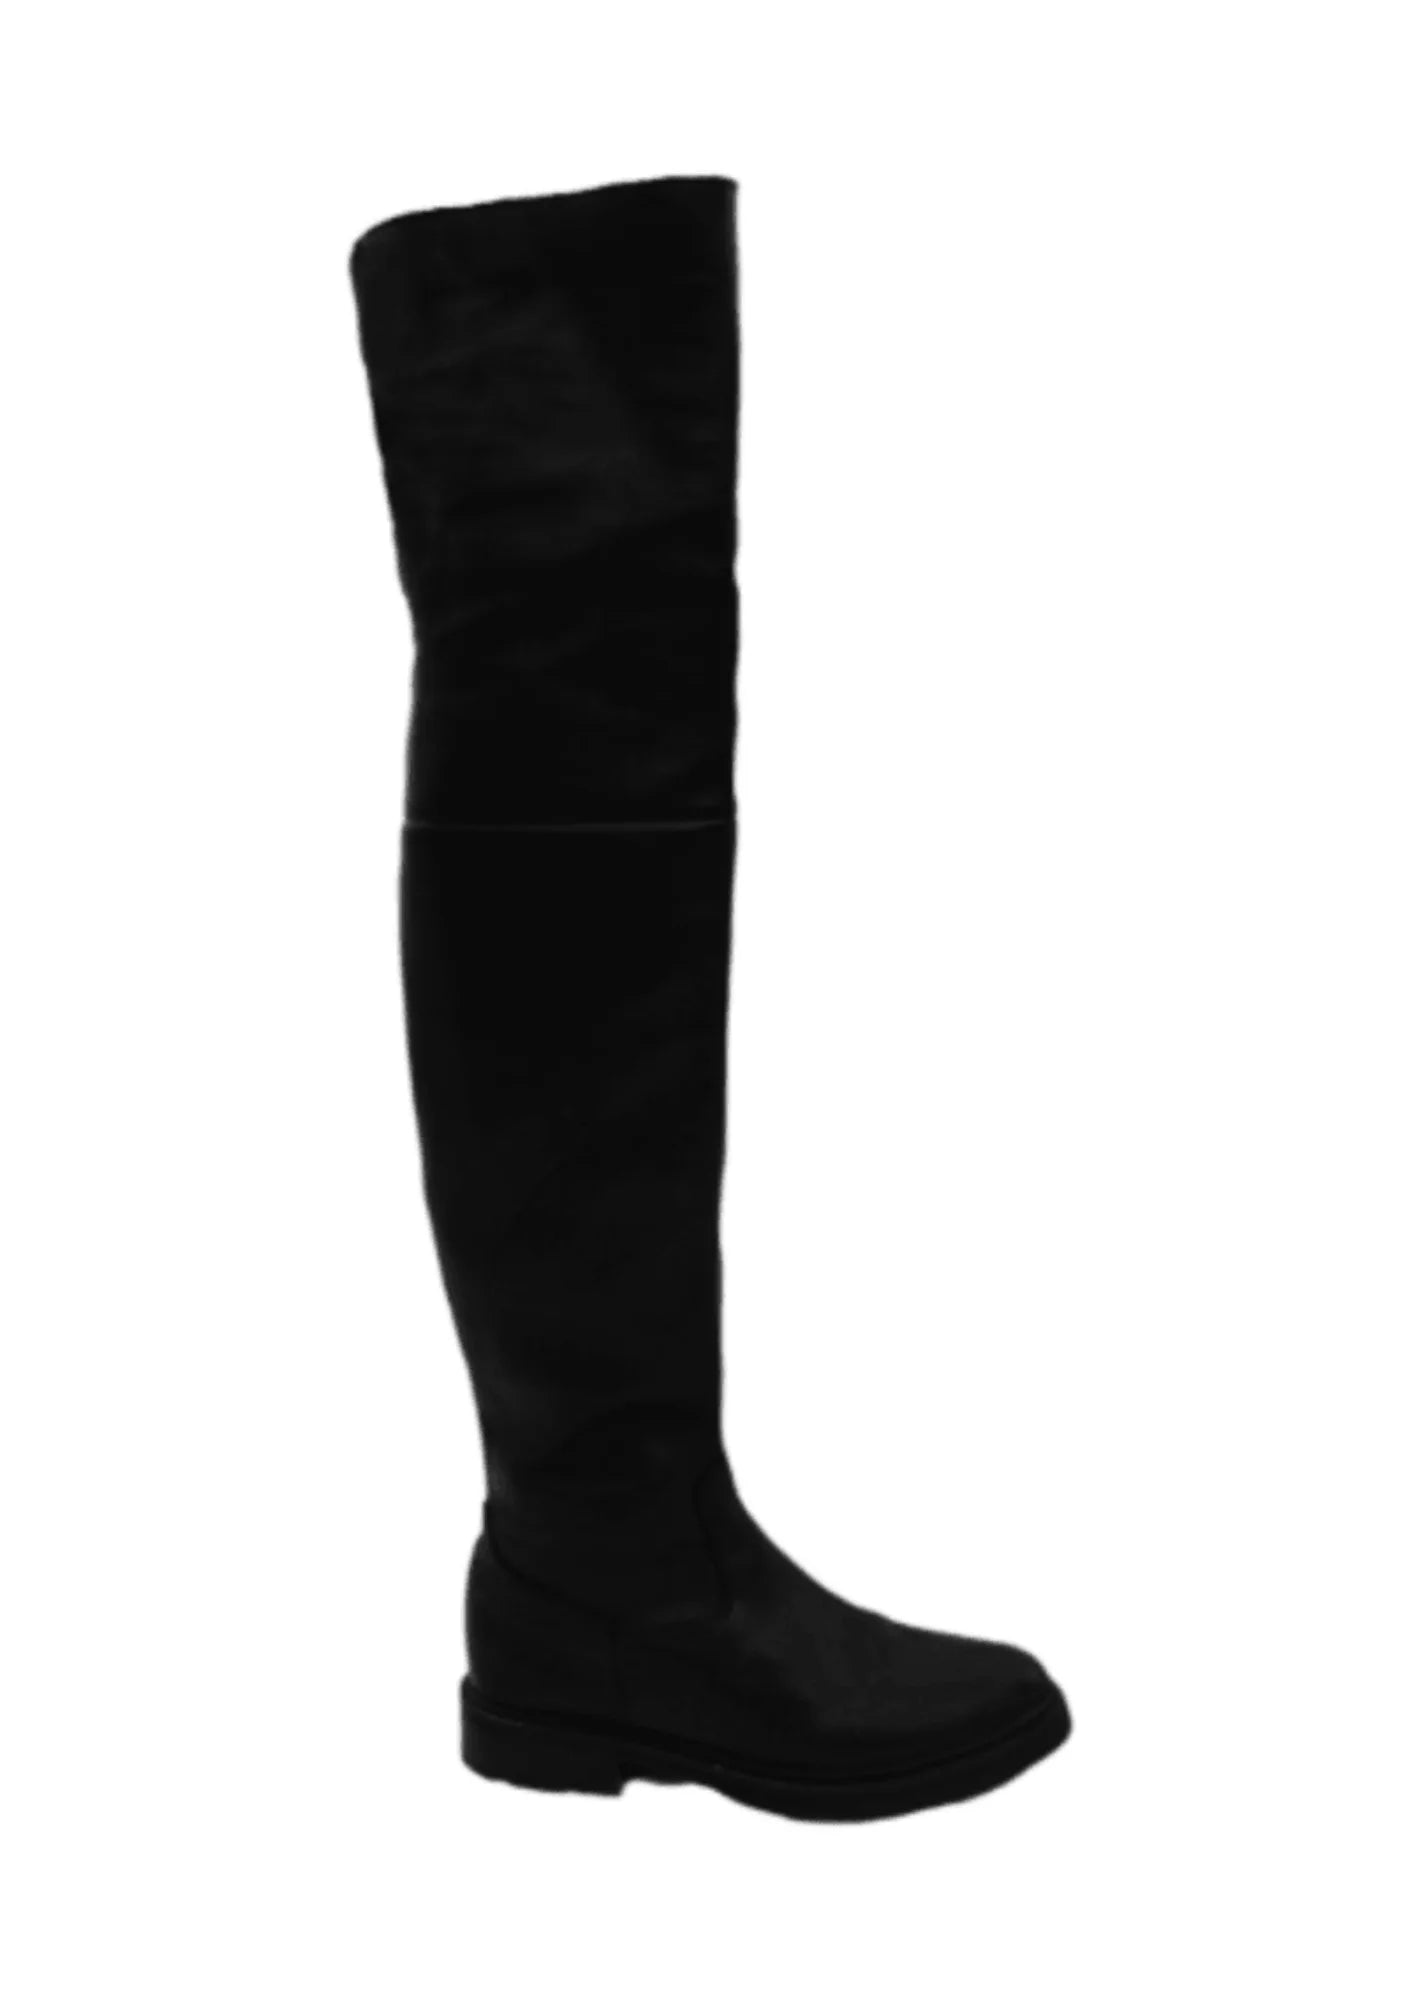 BLACK OVER-THE-KNEE BOOTS